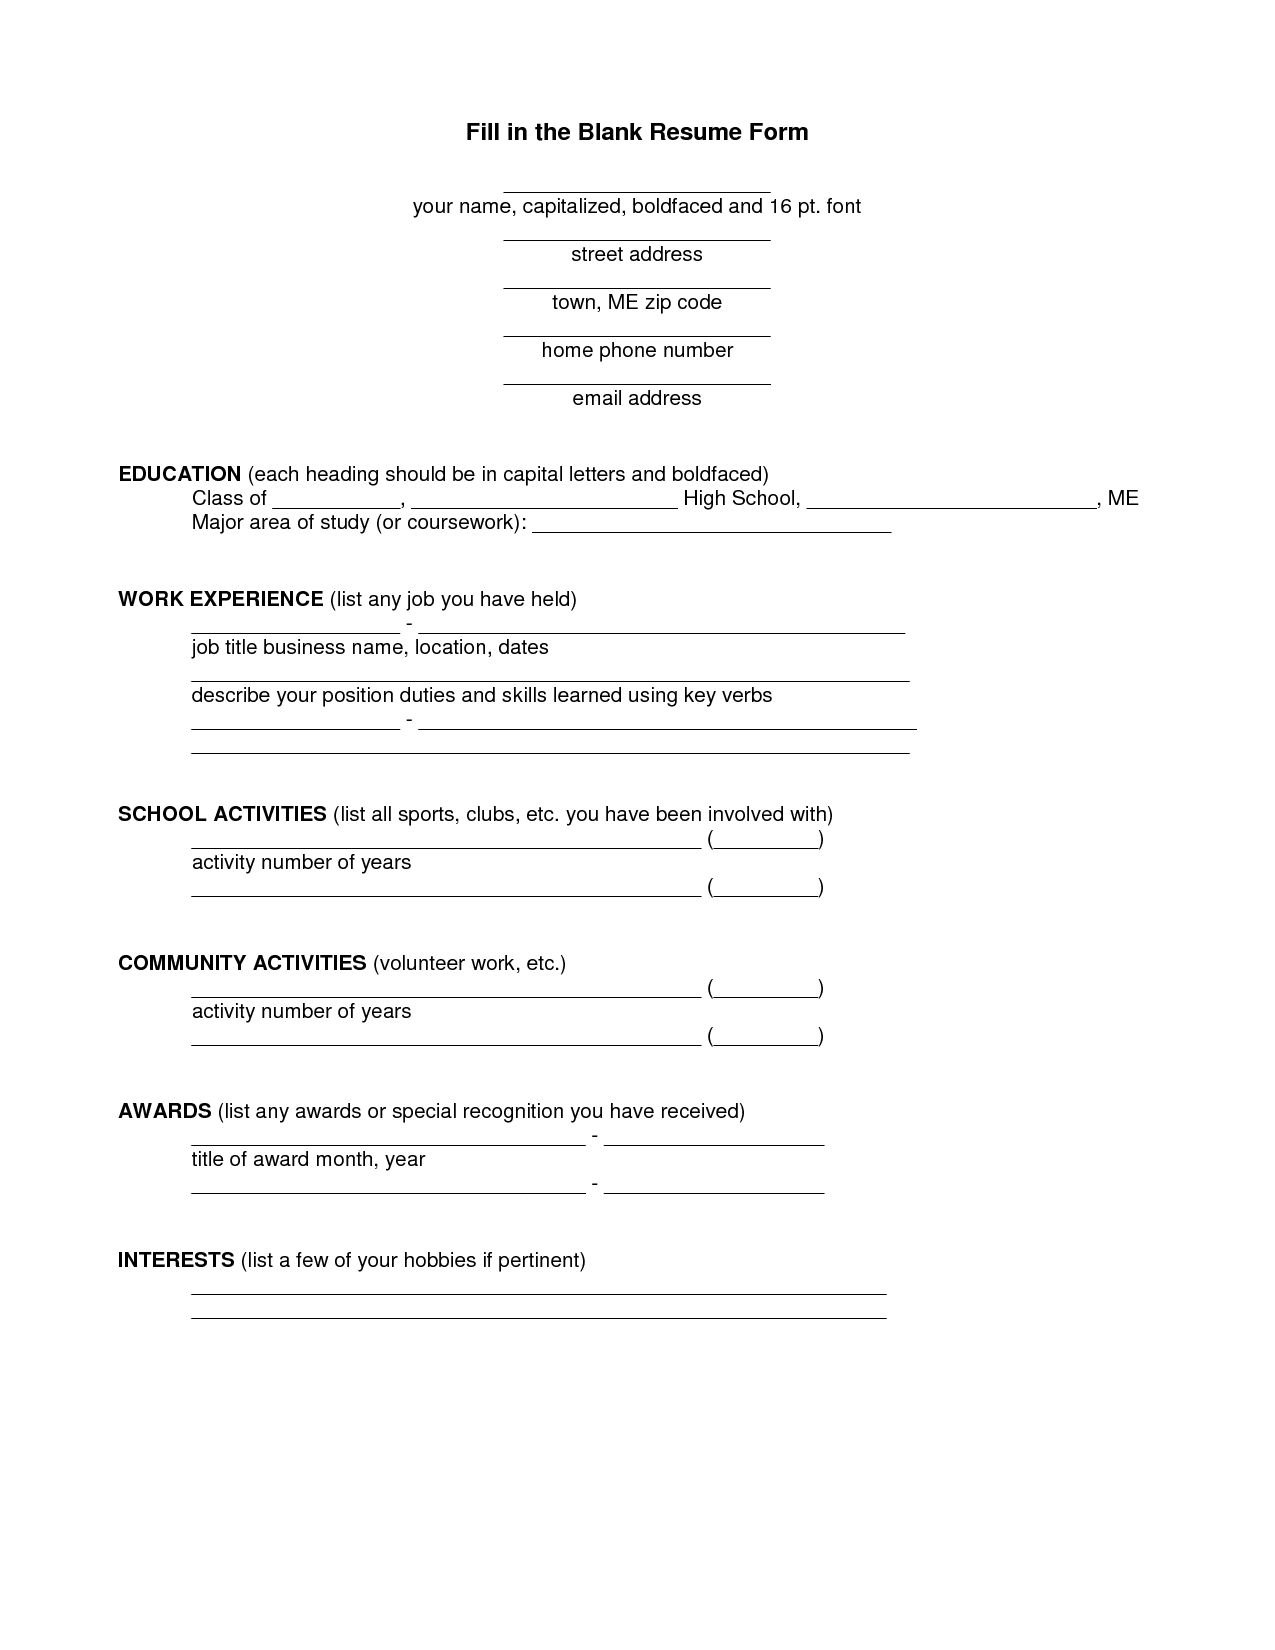 Free Printable Fill in Blank Resume Template Image